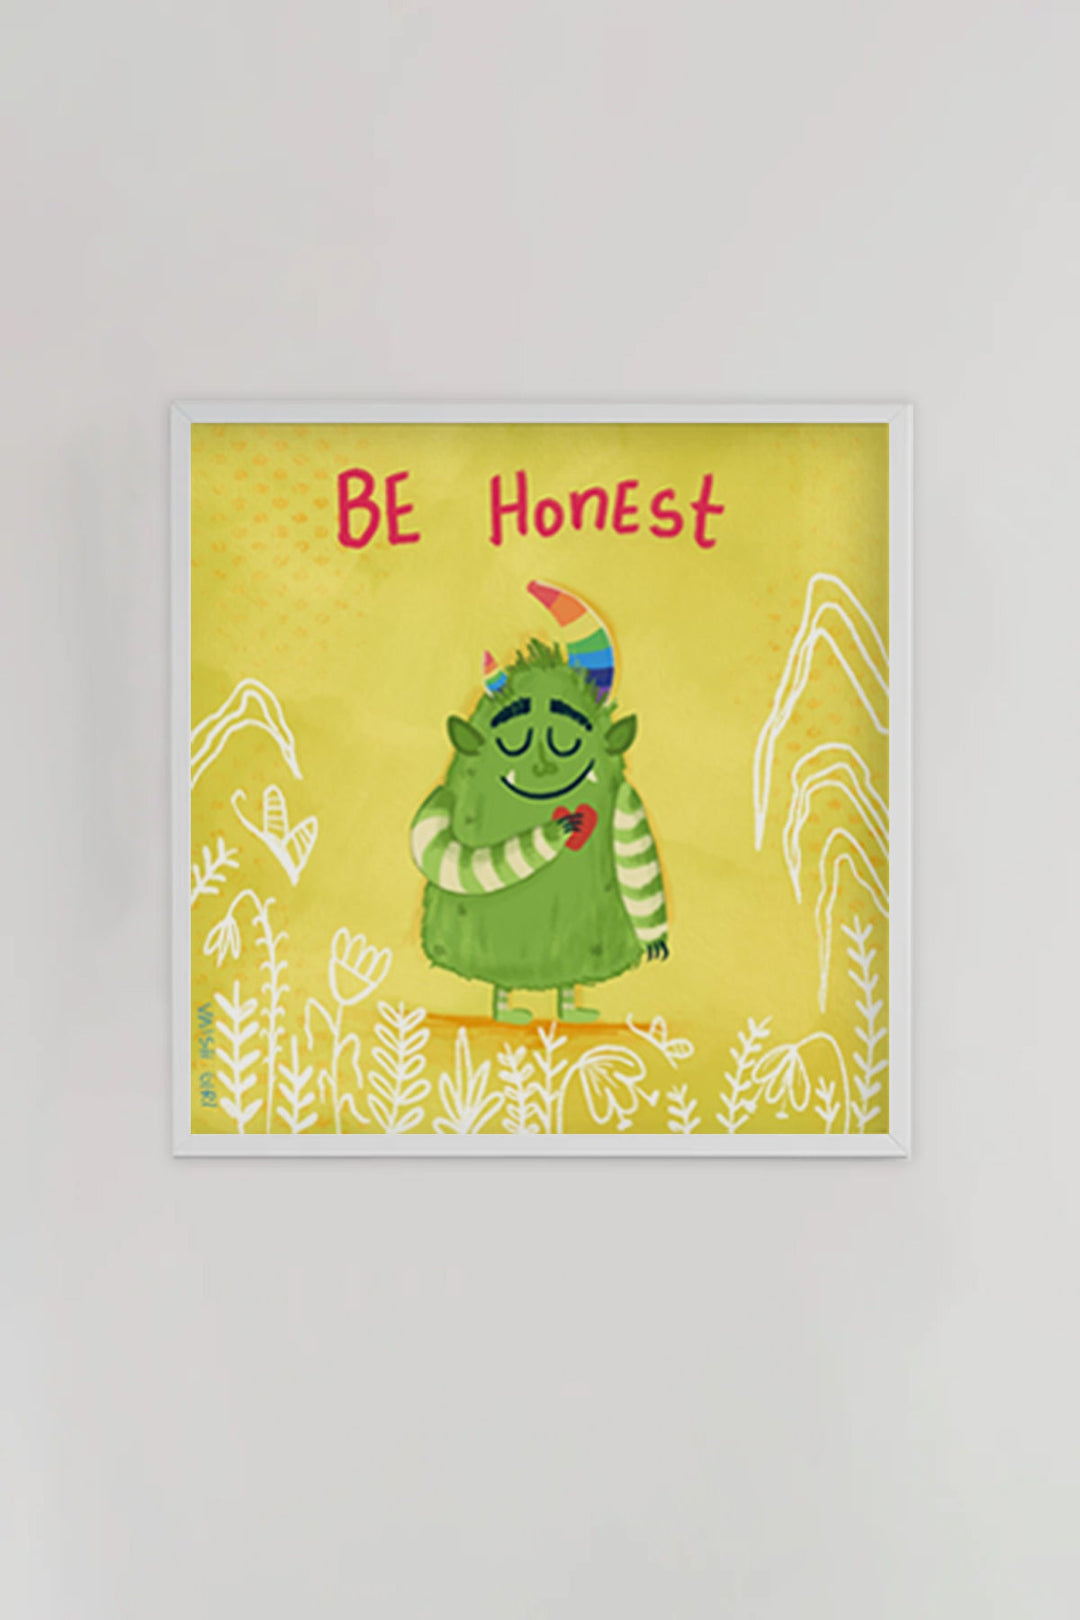 Set of 3 Wall Arts - Be Kind, Be Honest & Be Silly